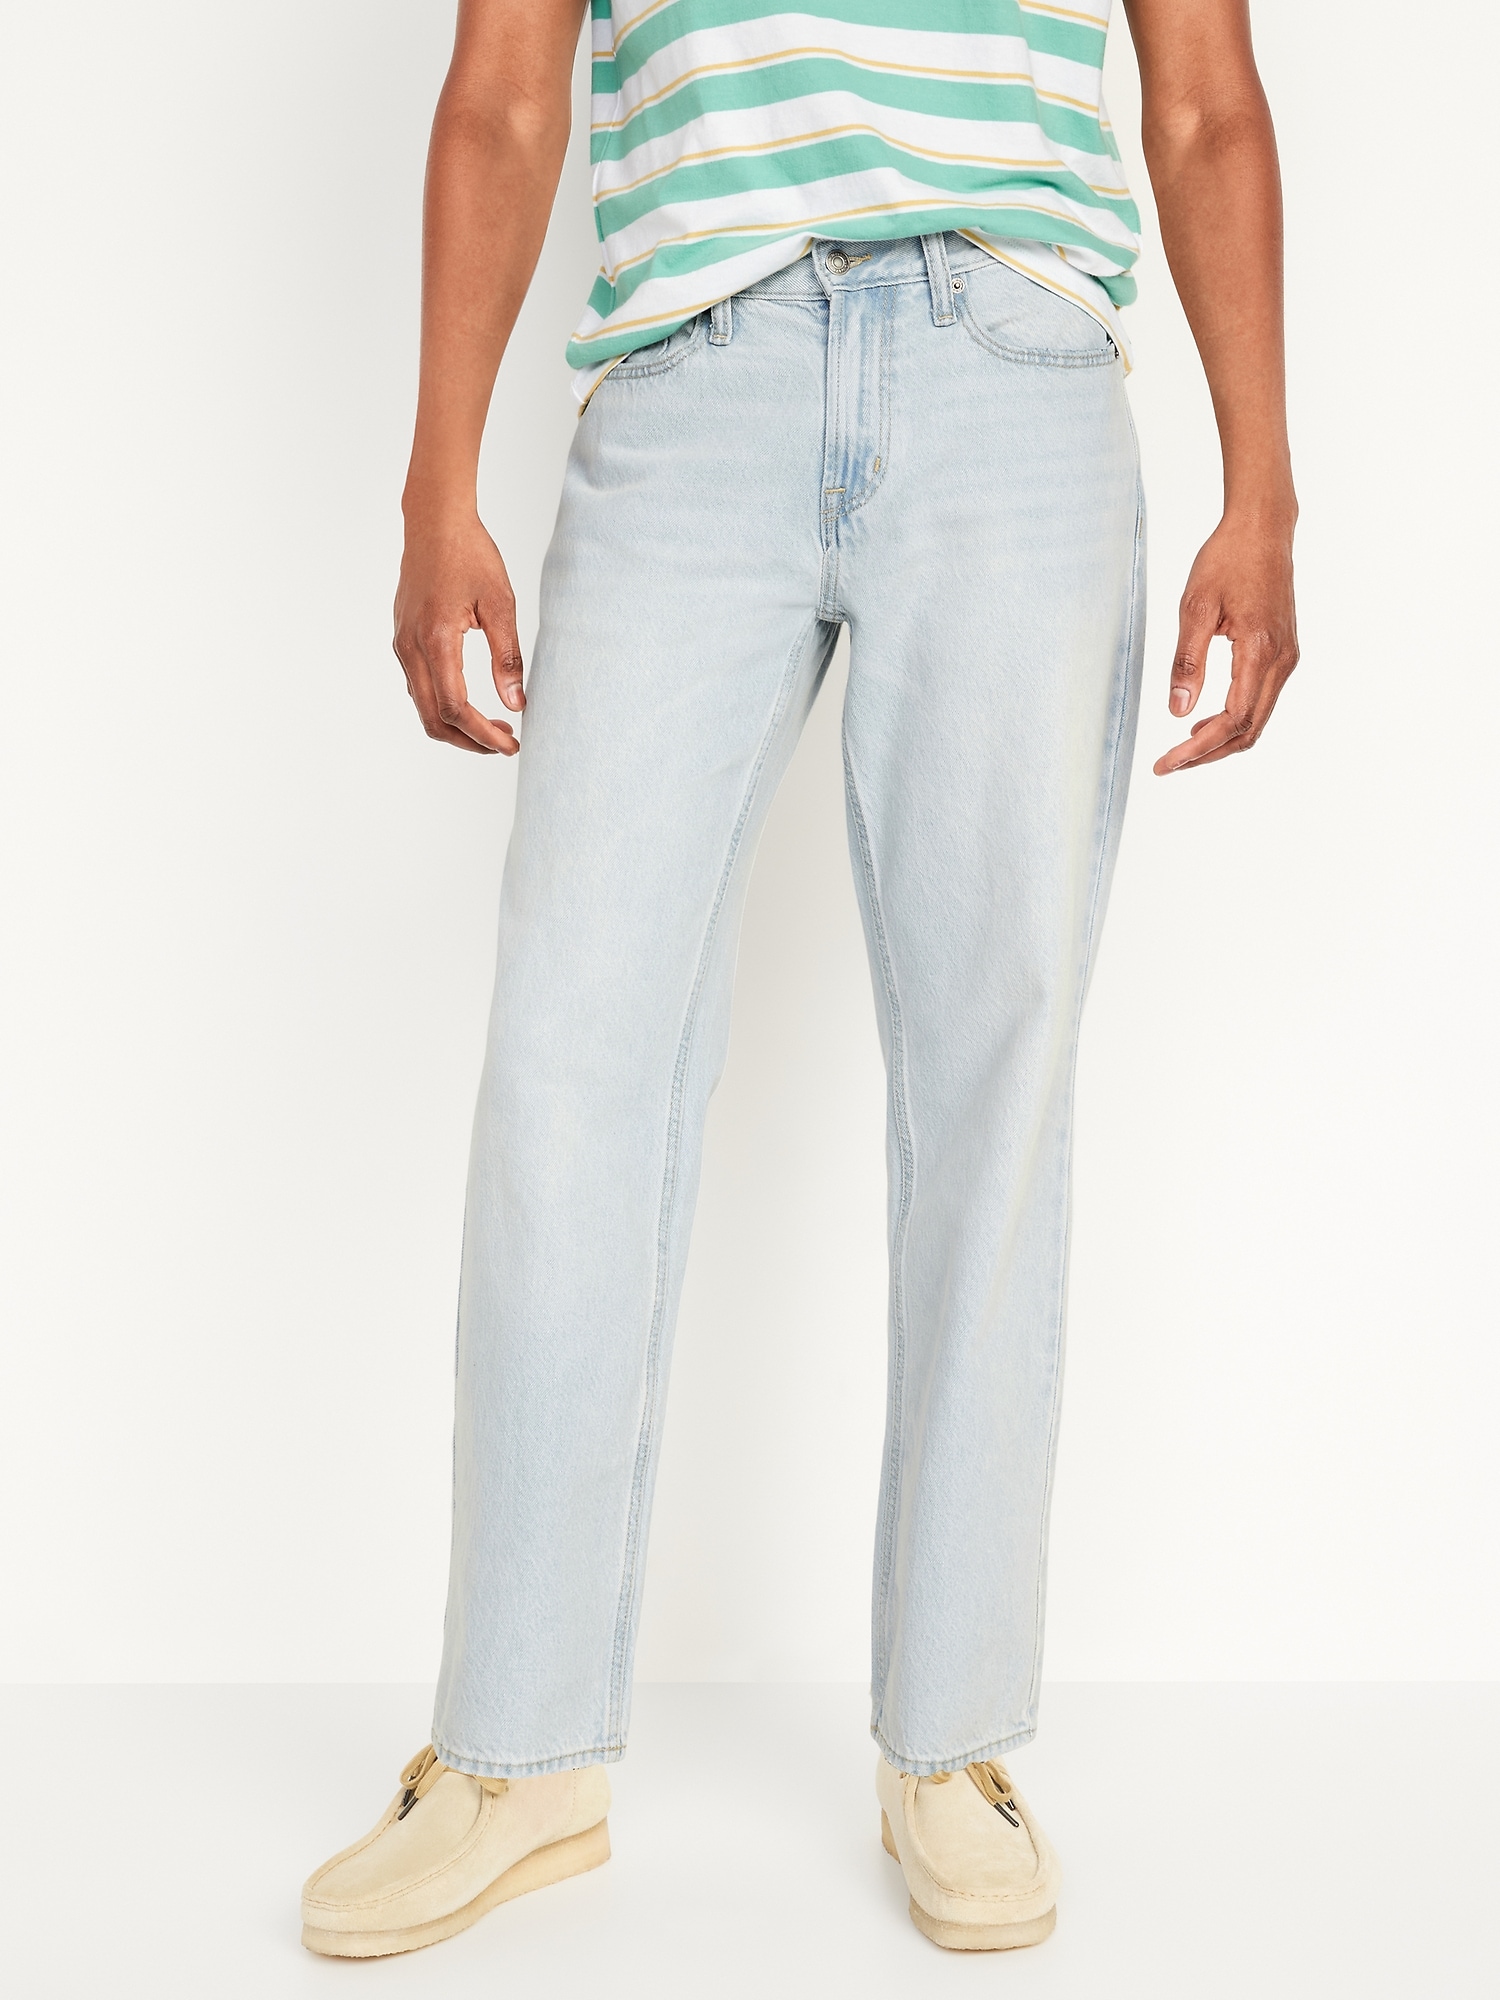 Straight Fit Stretch Jean in Faded Wash